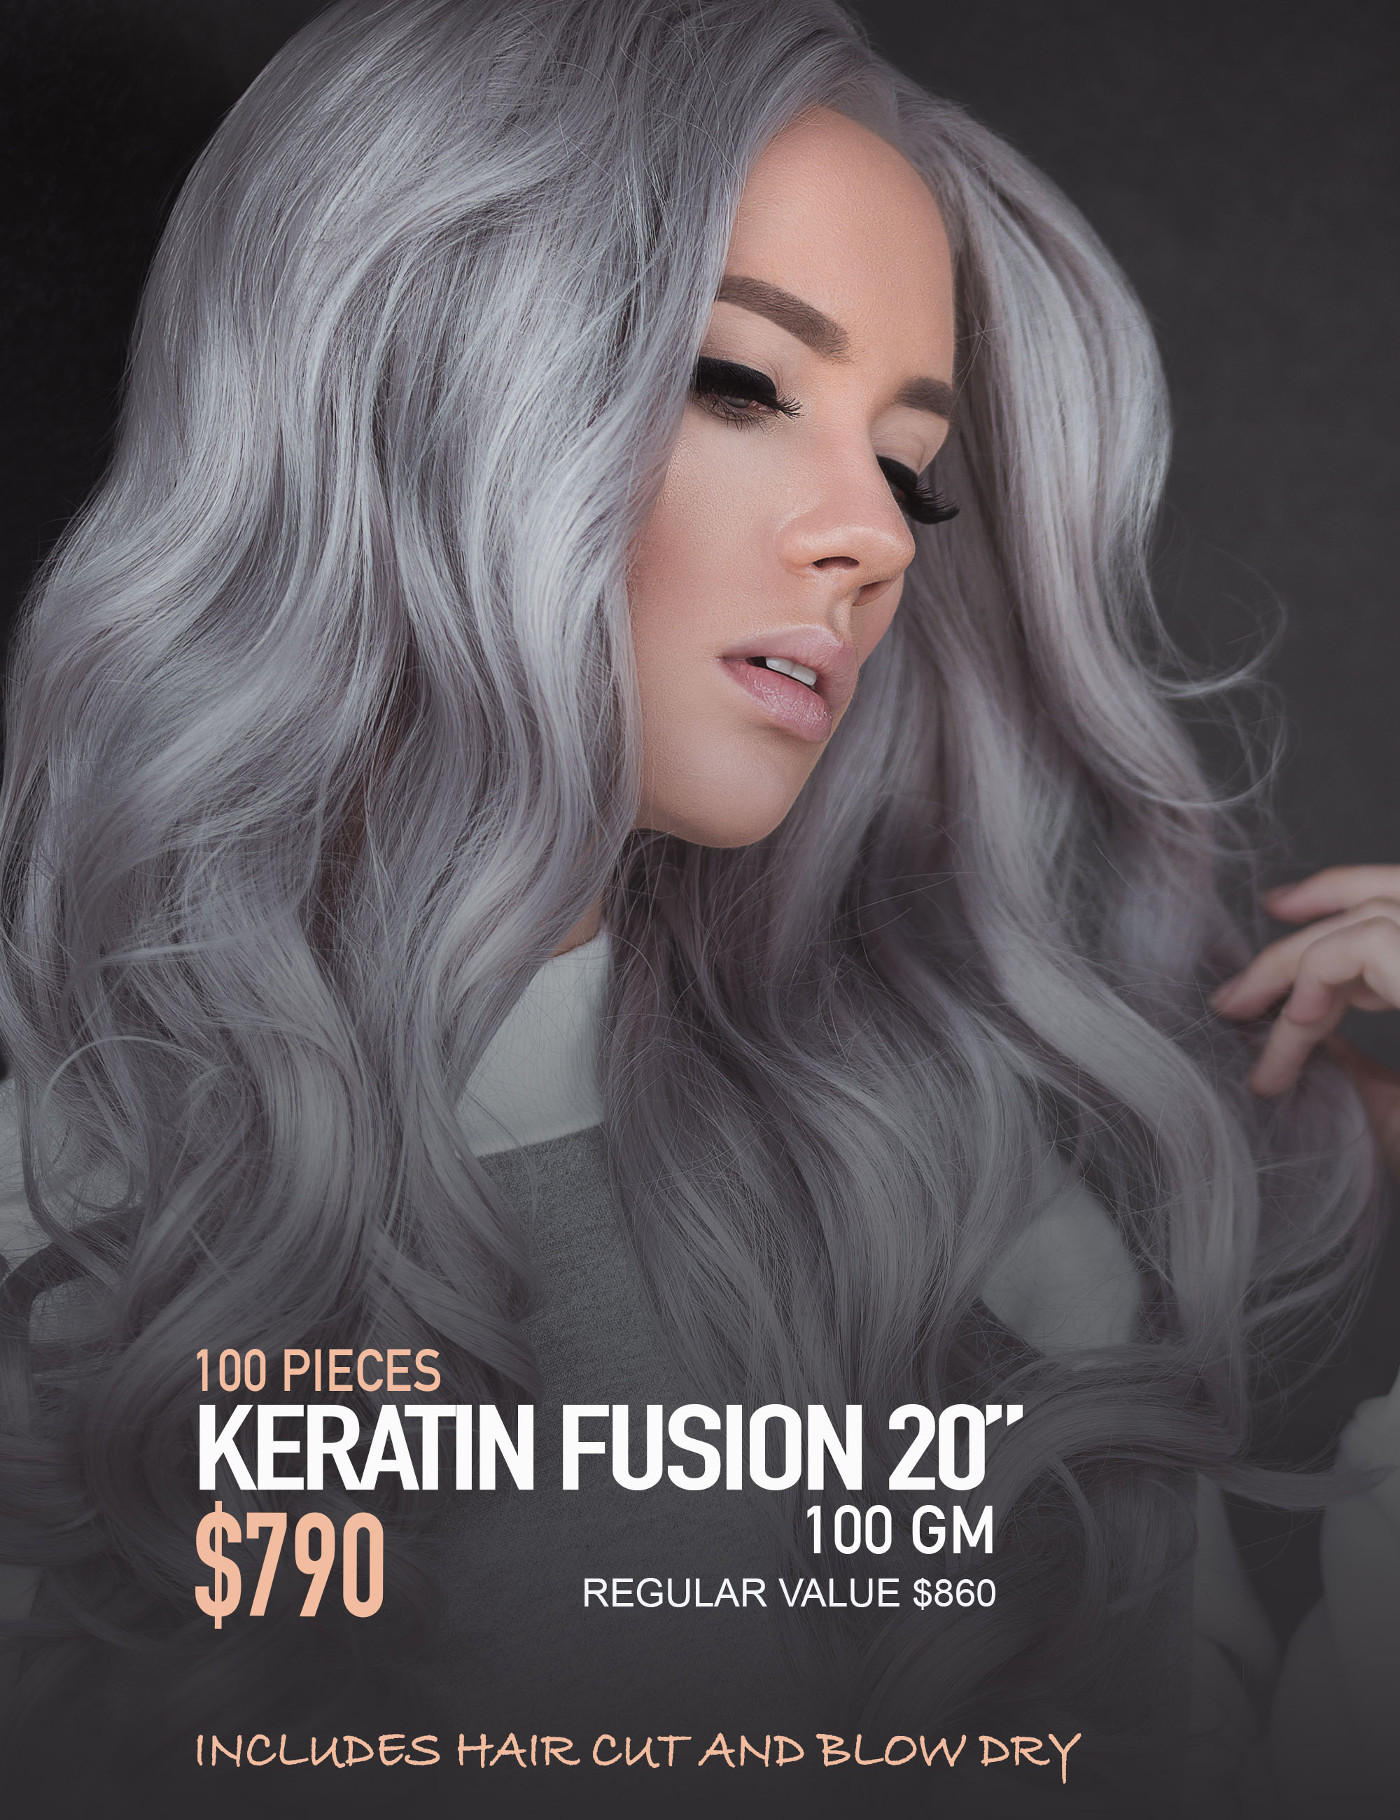 100 pieces keratin cold fusion 20" Hair Extensions,Include hair cut and blow dry, free kit argan oil, gift with this service